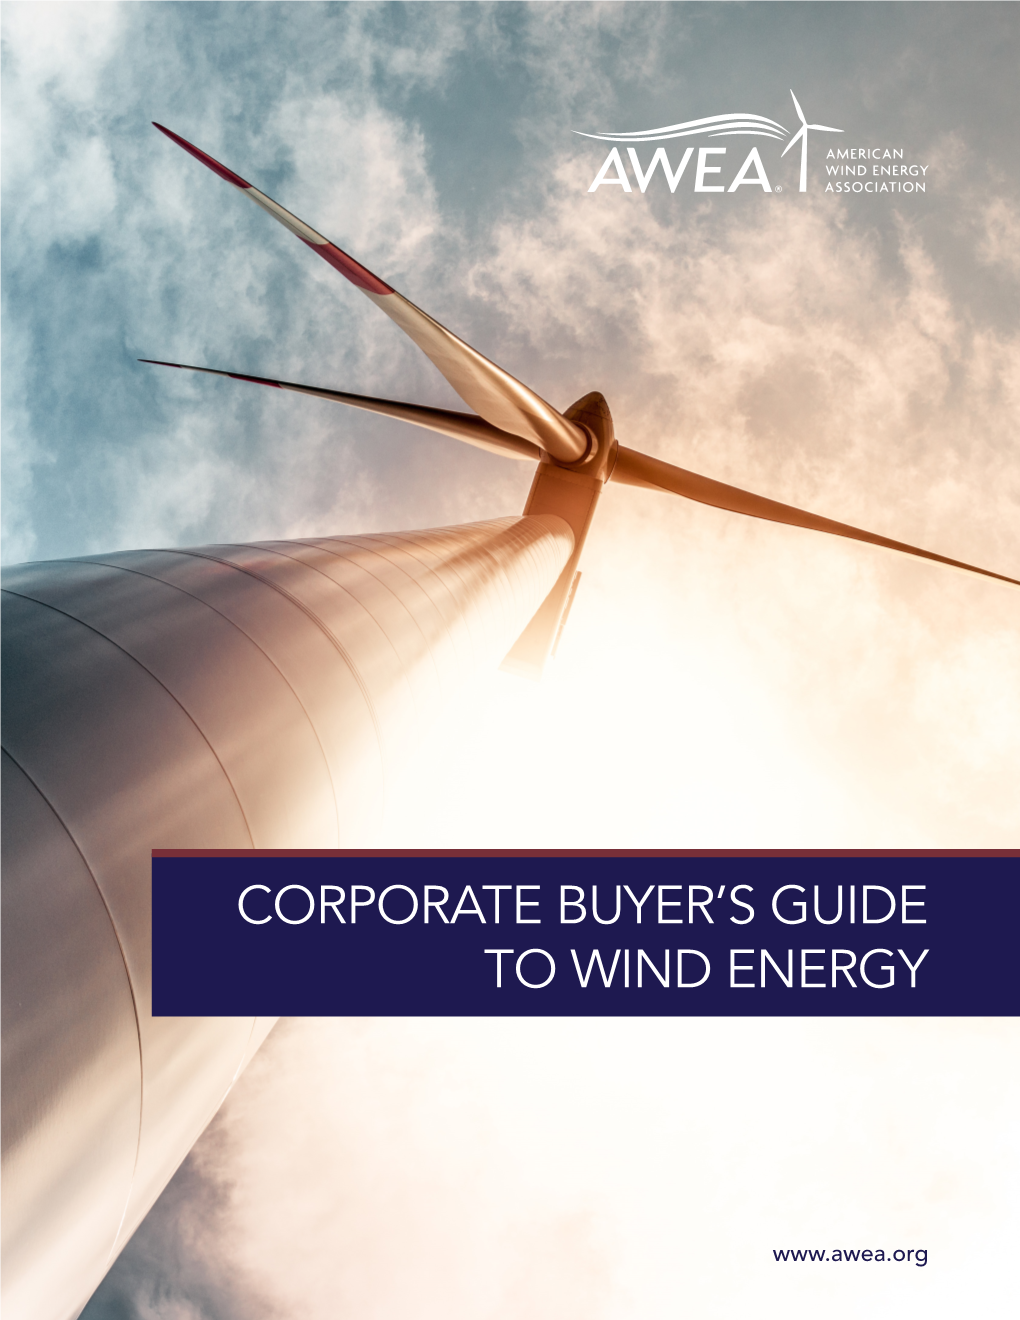 Corporate Buyer's Guide to Wind Energy